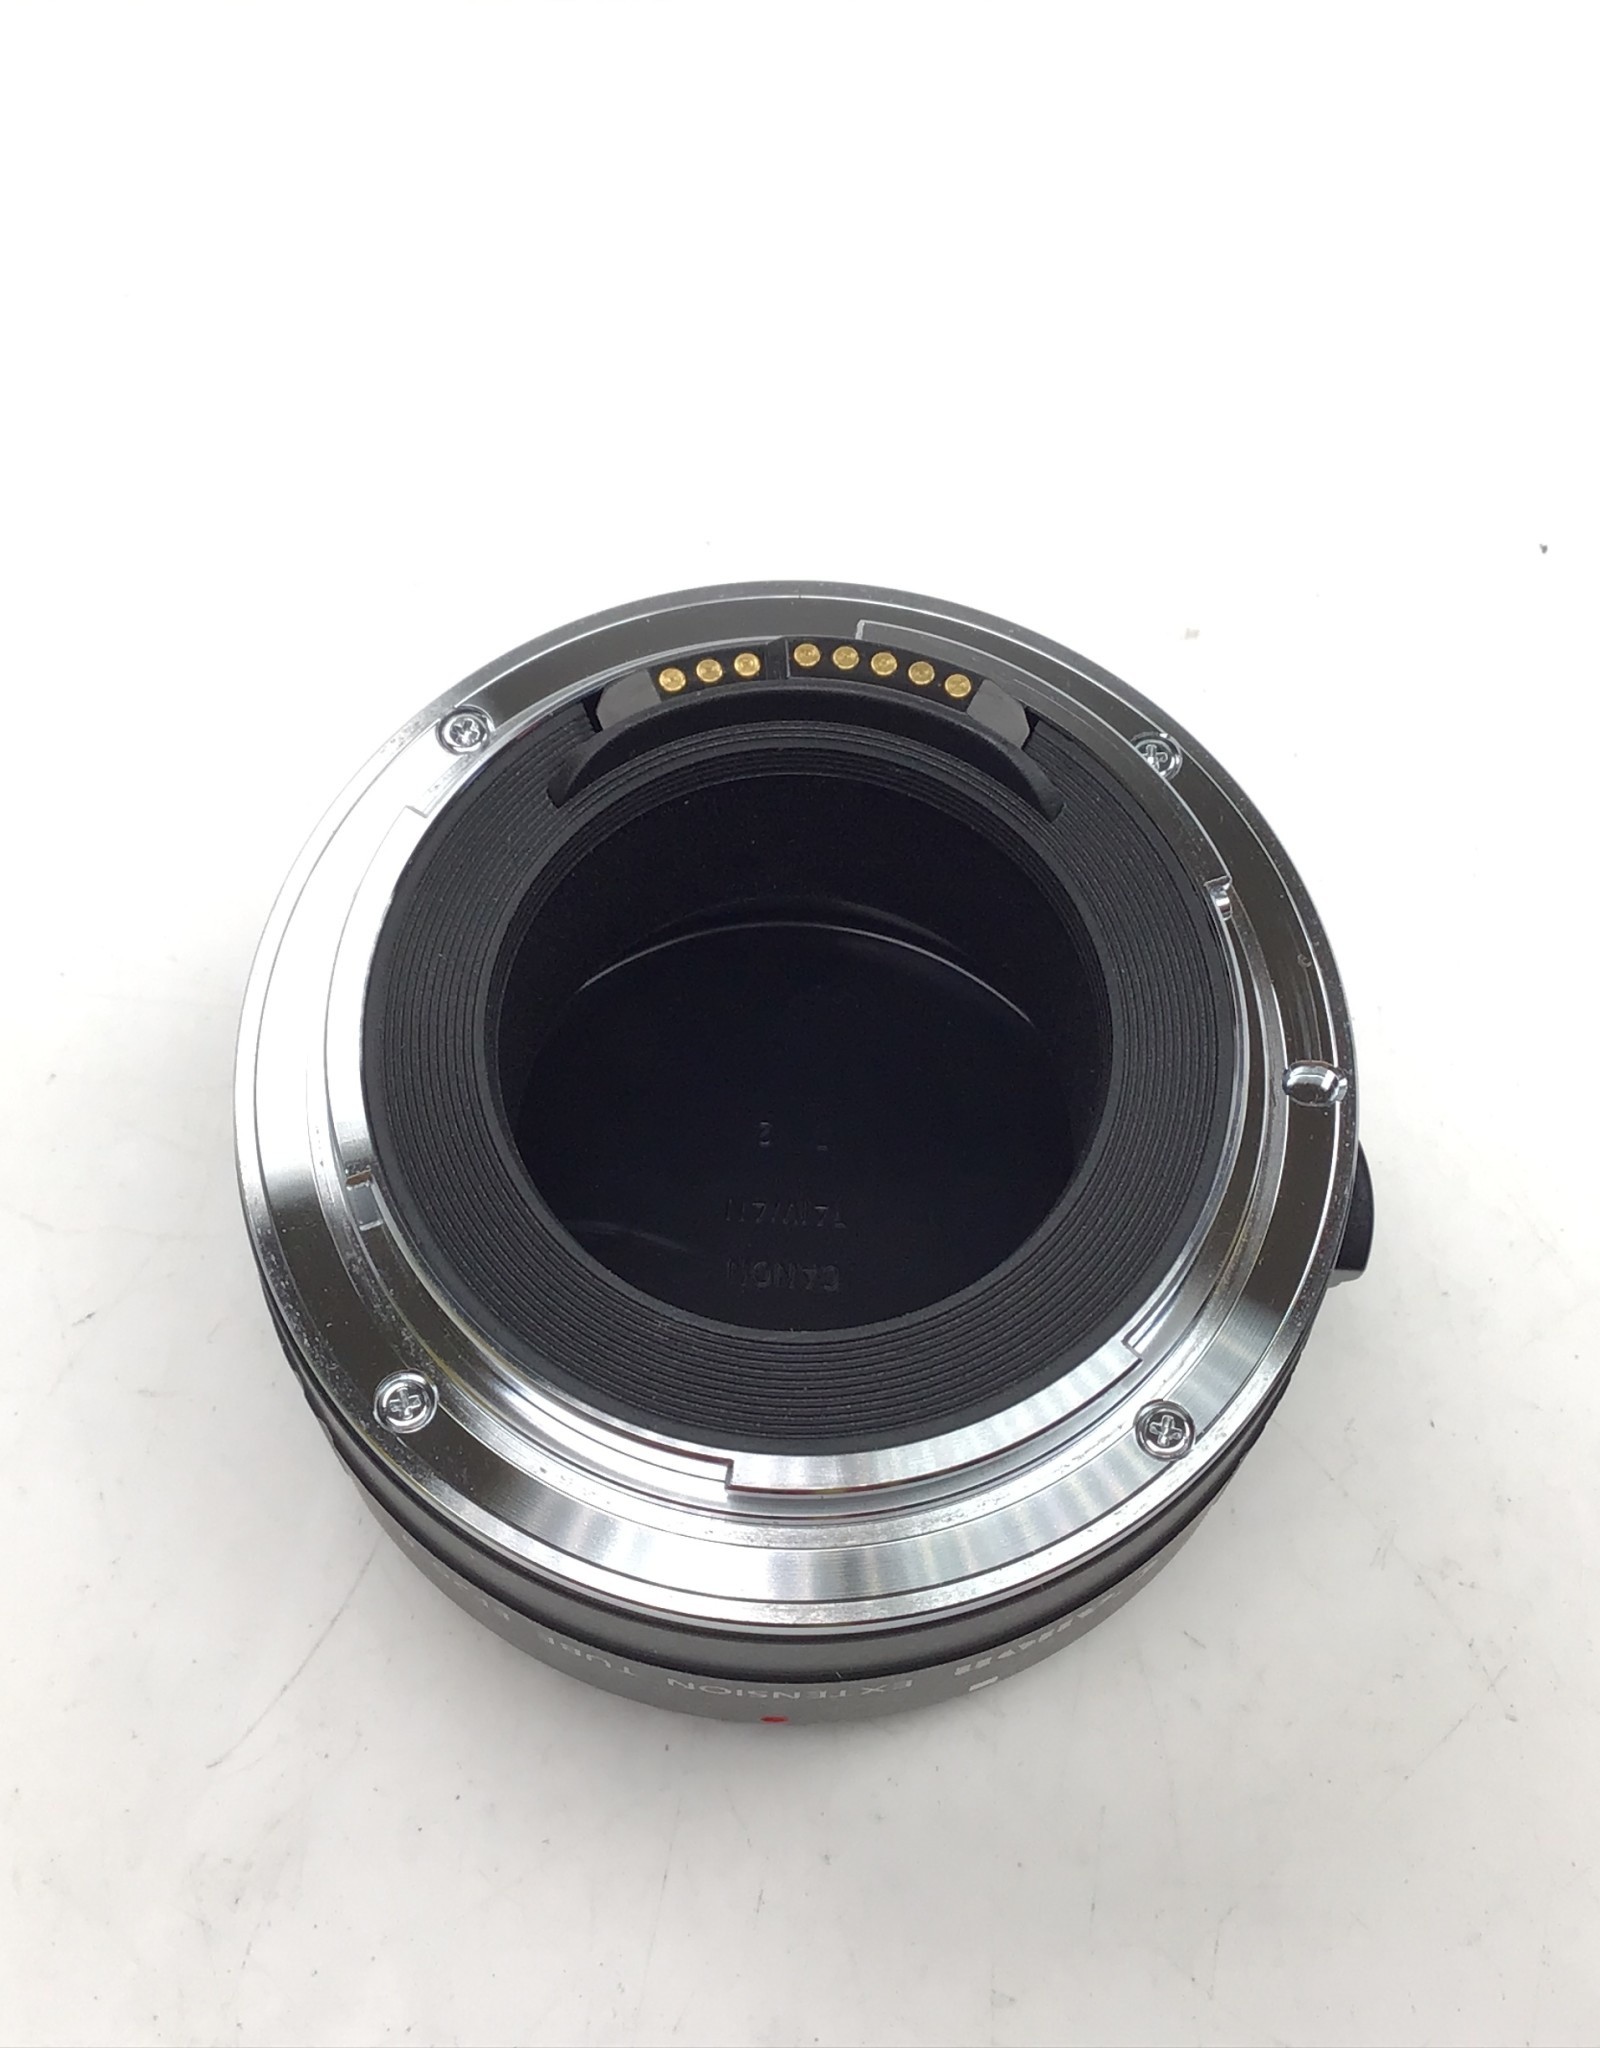 CANON Canon Extension Tube EF25 II Used EX